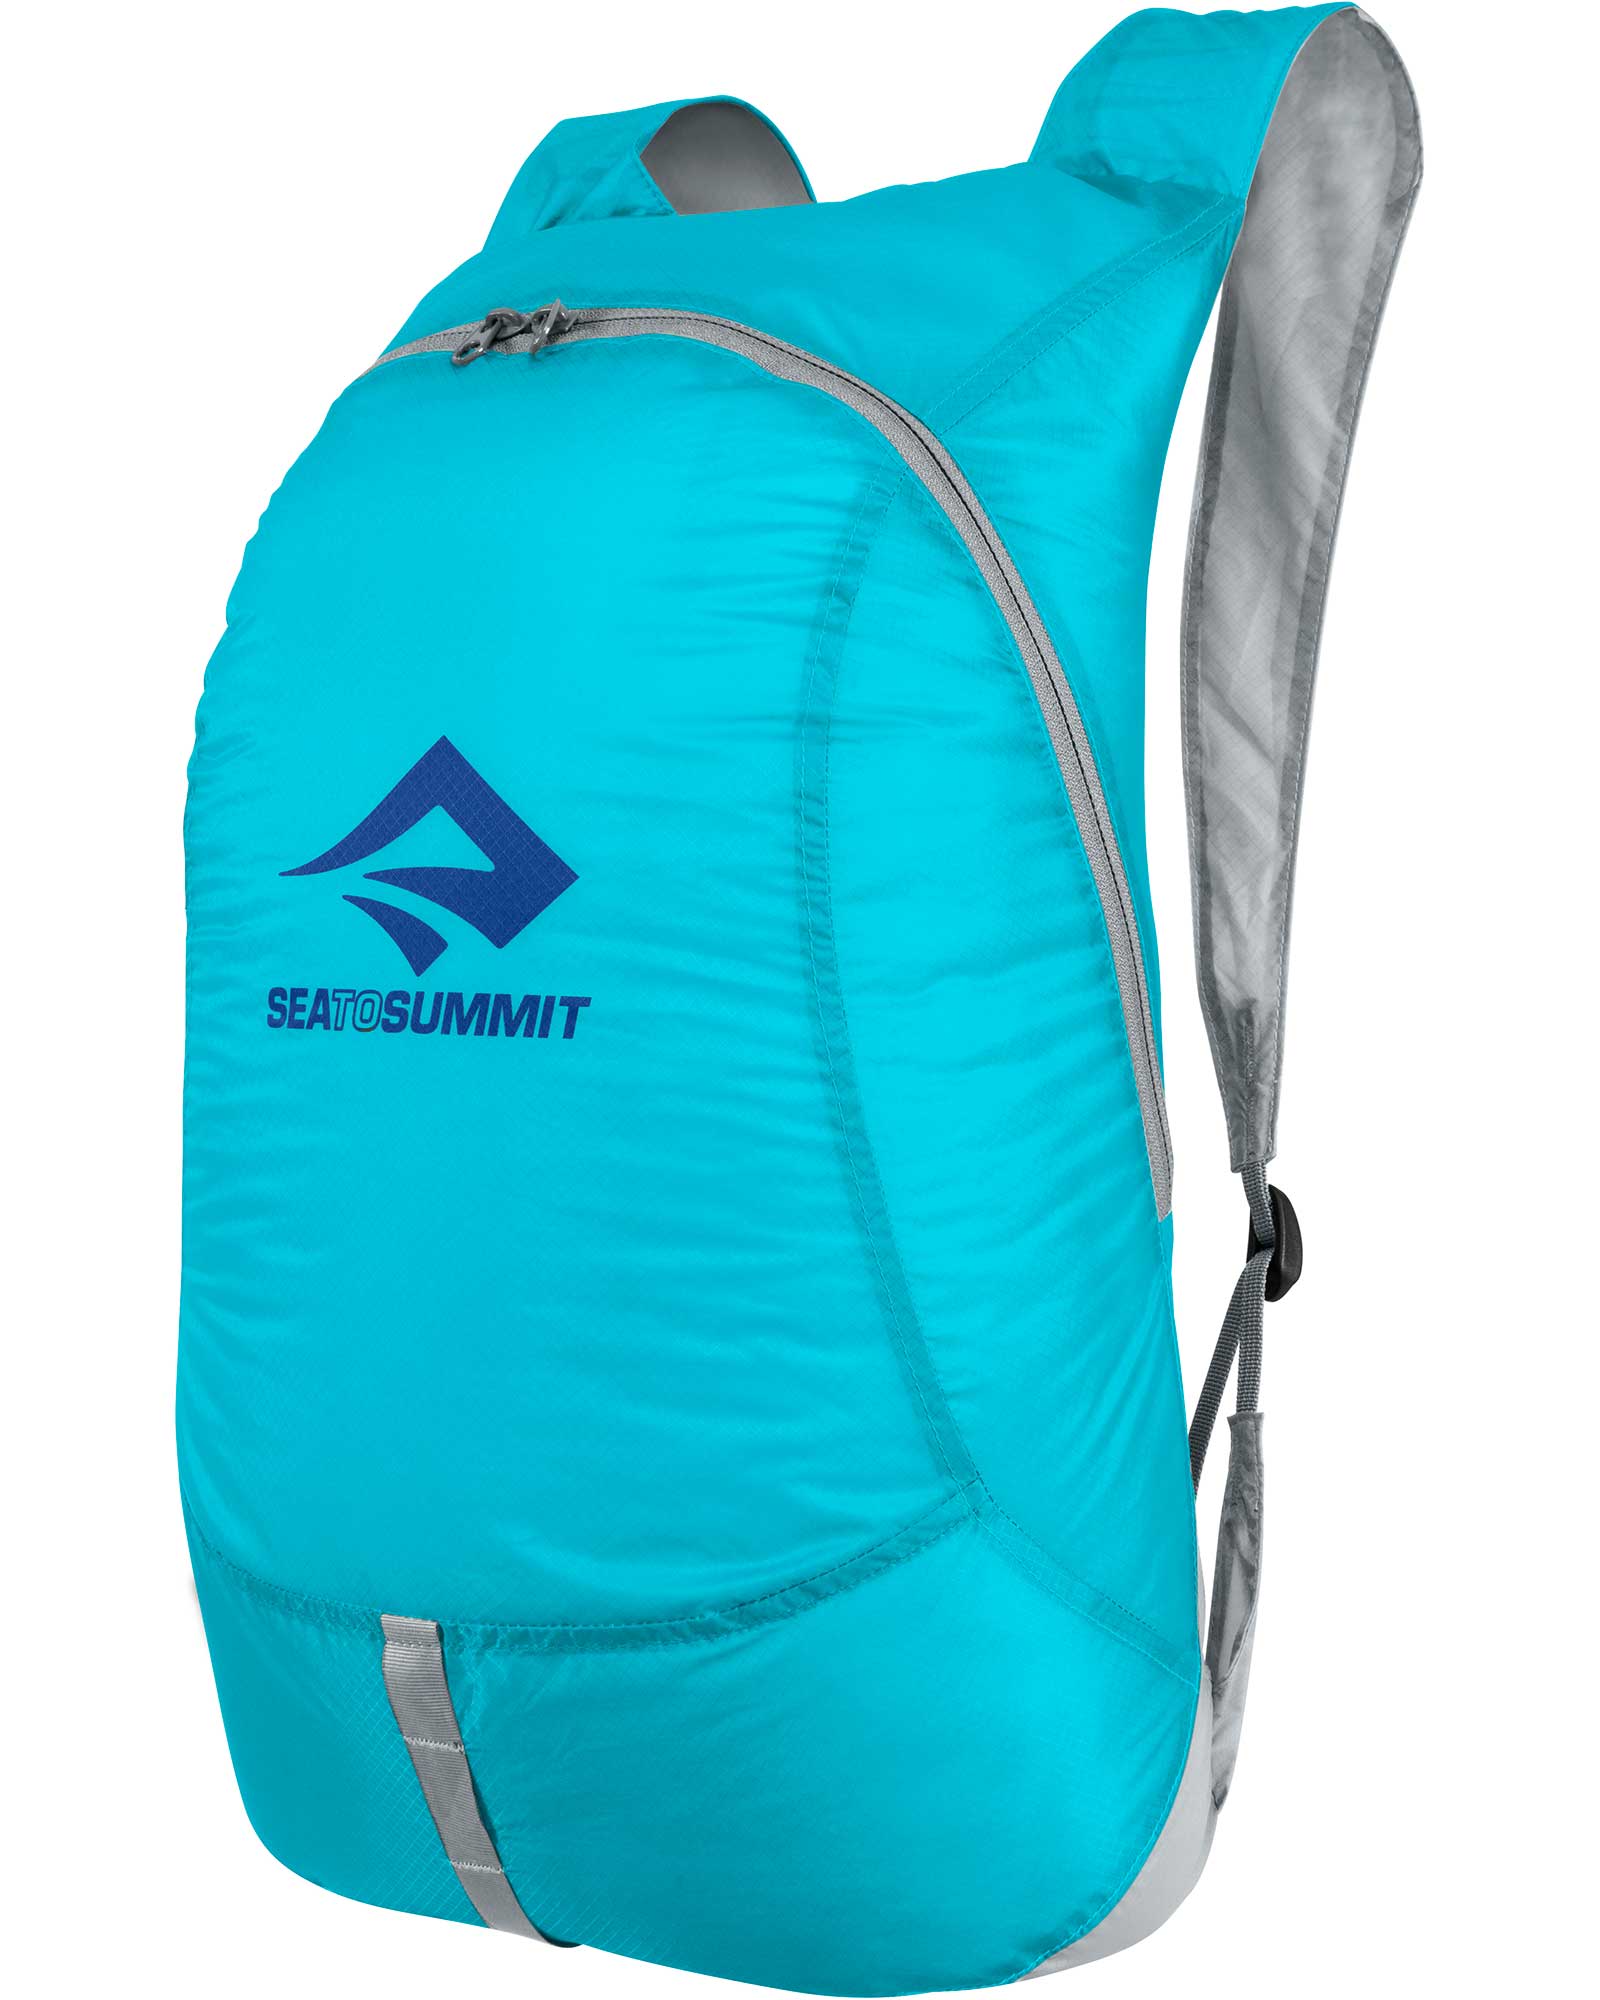 Sea to Summit Sea to Summit Ultra Sil Day Pack 20L - Blue Atoll